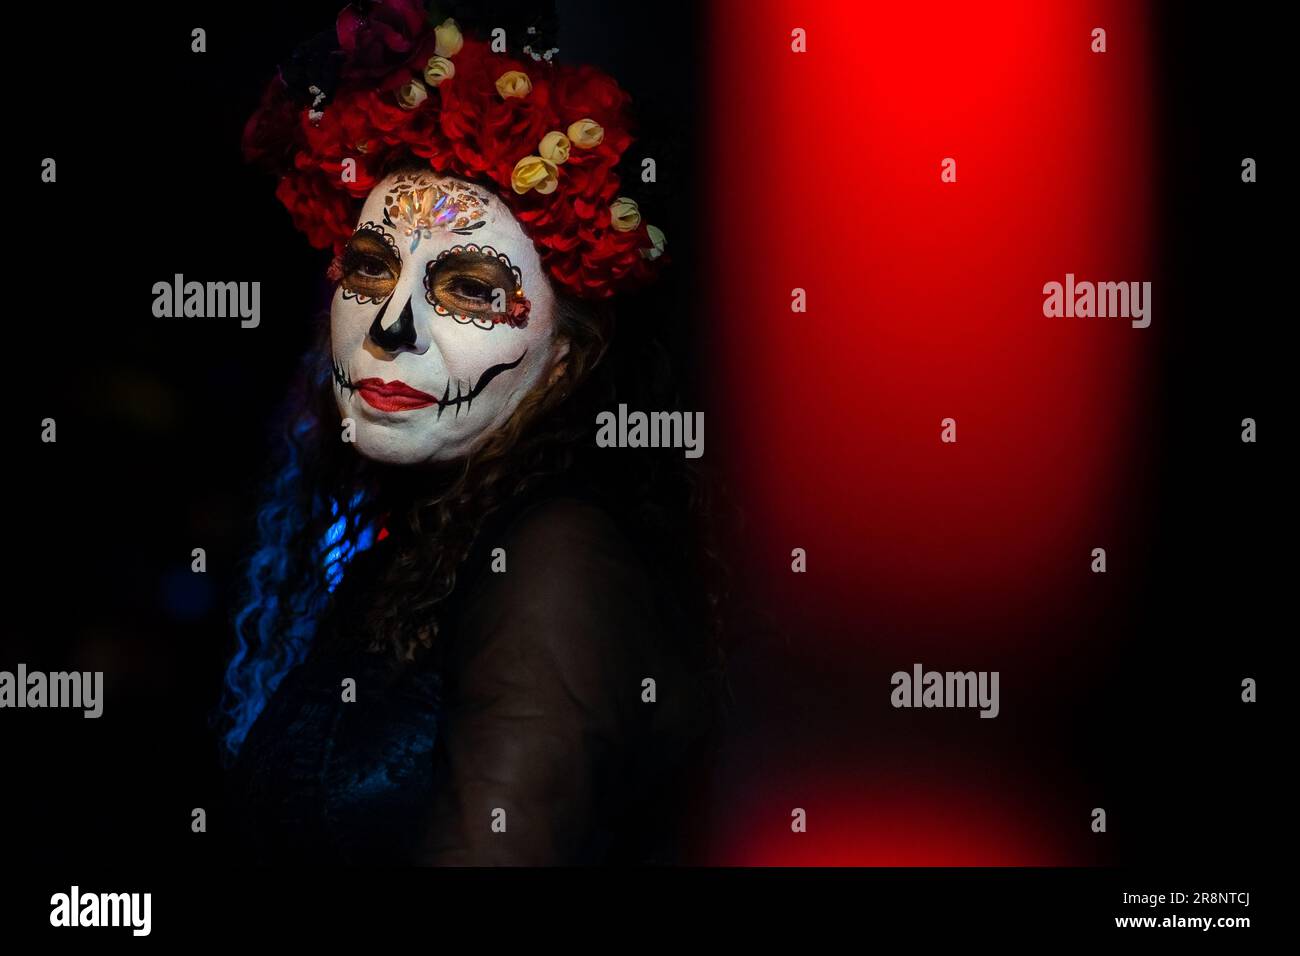 A Mexican woman, dressed as La Catrina, takes part in the Day of the Dead festivities in Tlaquepaque, Mexico. Stock Photo